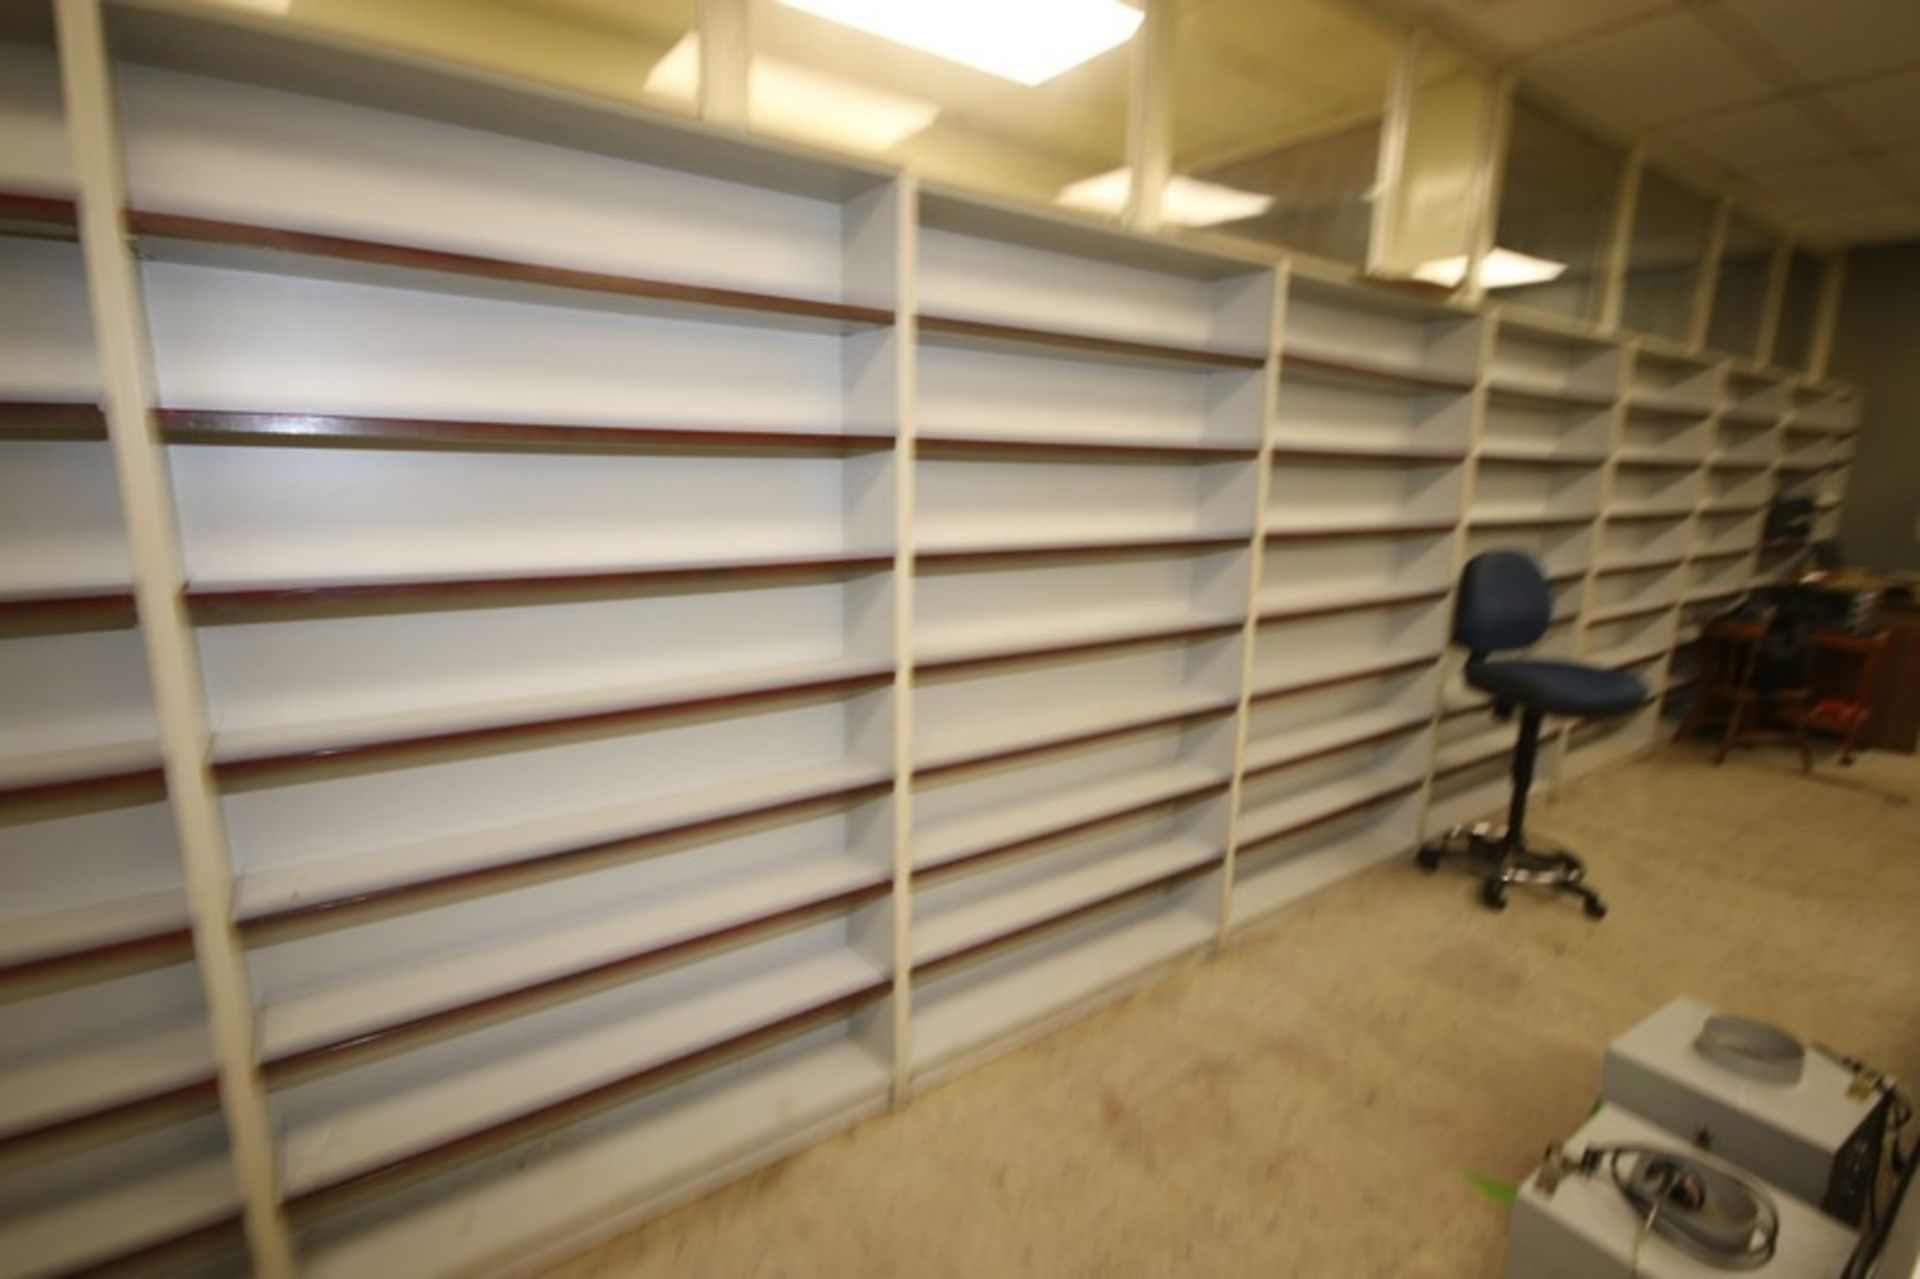 Sections of Wooden Lab Shelving, Section Overall Dims.: Aprox. 7' H x 4' W (Old Tag #102) (Located - Image 2 of 4